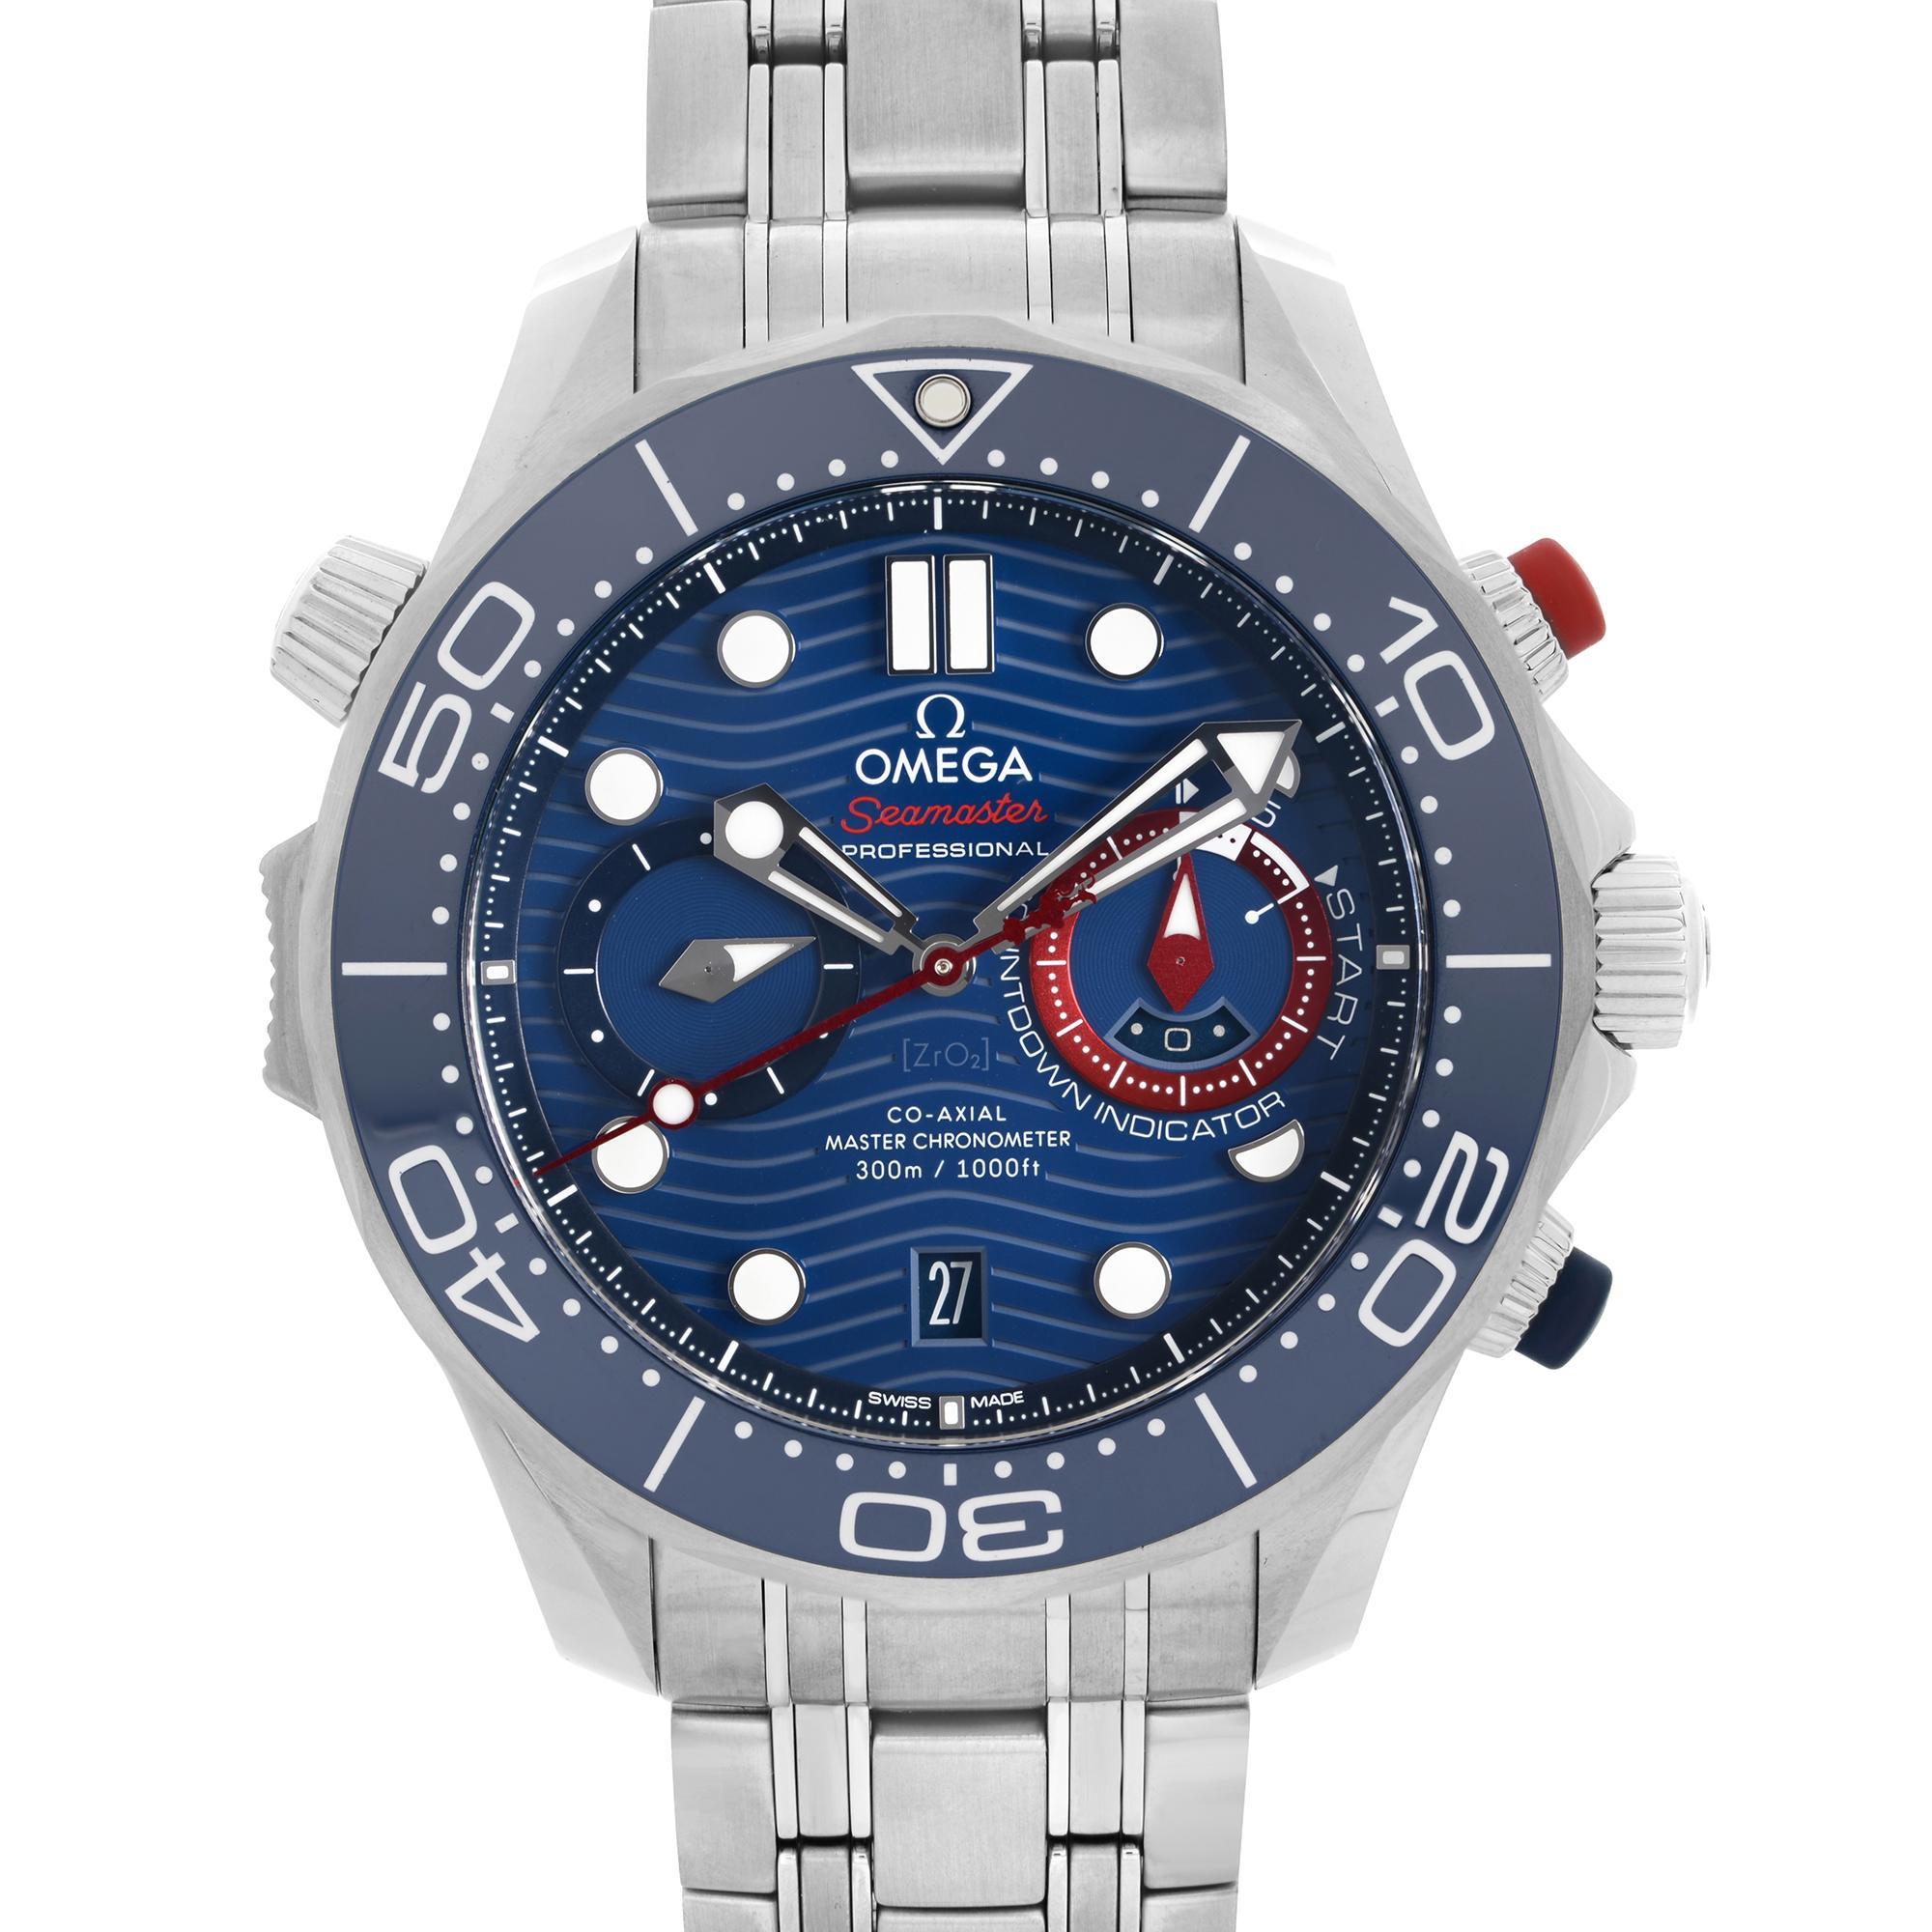 Unworn Model Omega Seamaster Diver 300M American Cup Automatic Men's Watch 210.30.44.51.03.002. This Beautiful Timepiece is Powered by an Automatic Movement and Features: Stainless Steel Case and Bracelet, Unidirectional Rotating Stainless Steel